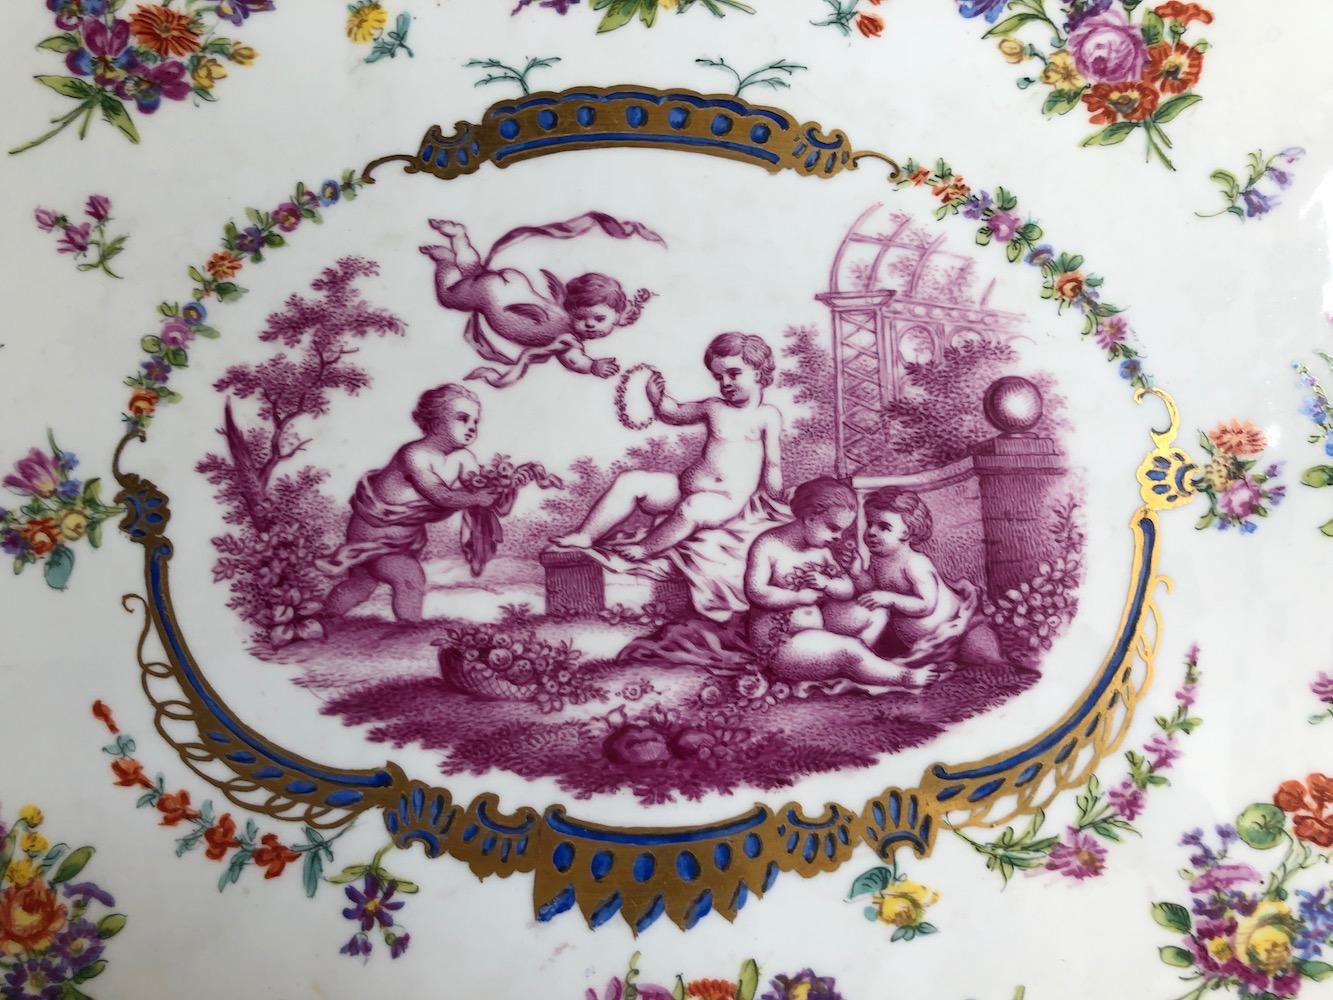 16 piece coffee/tea set with cupids and flowers. Original wooden box. Crossed swords mark. Meissen, circa 1900s.
Cushioned case, tray, pot, creamer, sugar bowl, 6 saucers, 6 cups, 6 spoons.